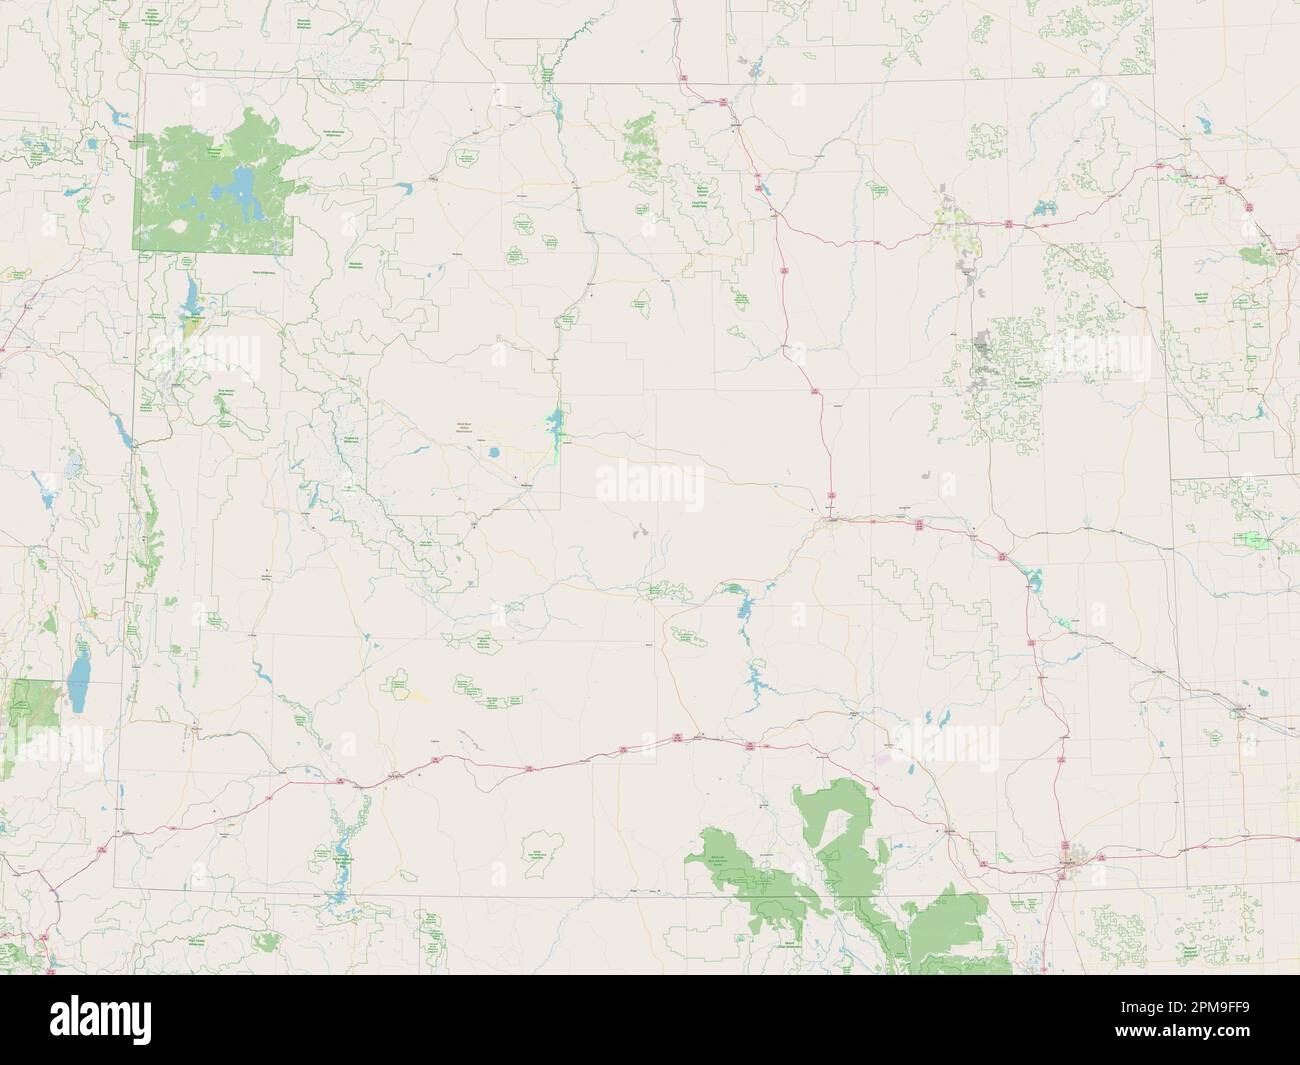 Wyoming, state of United States of America. Open Street Map Stock Photo